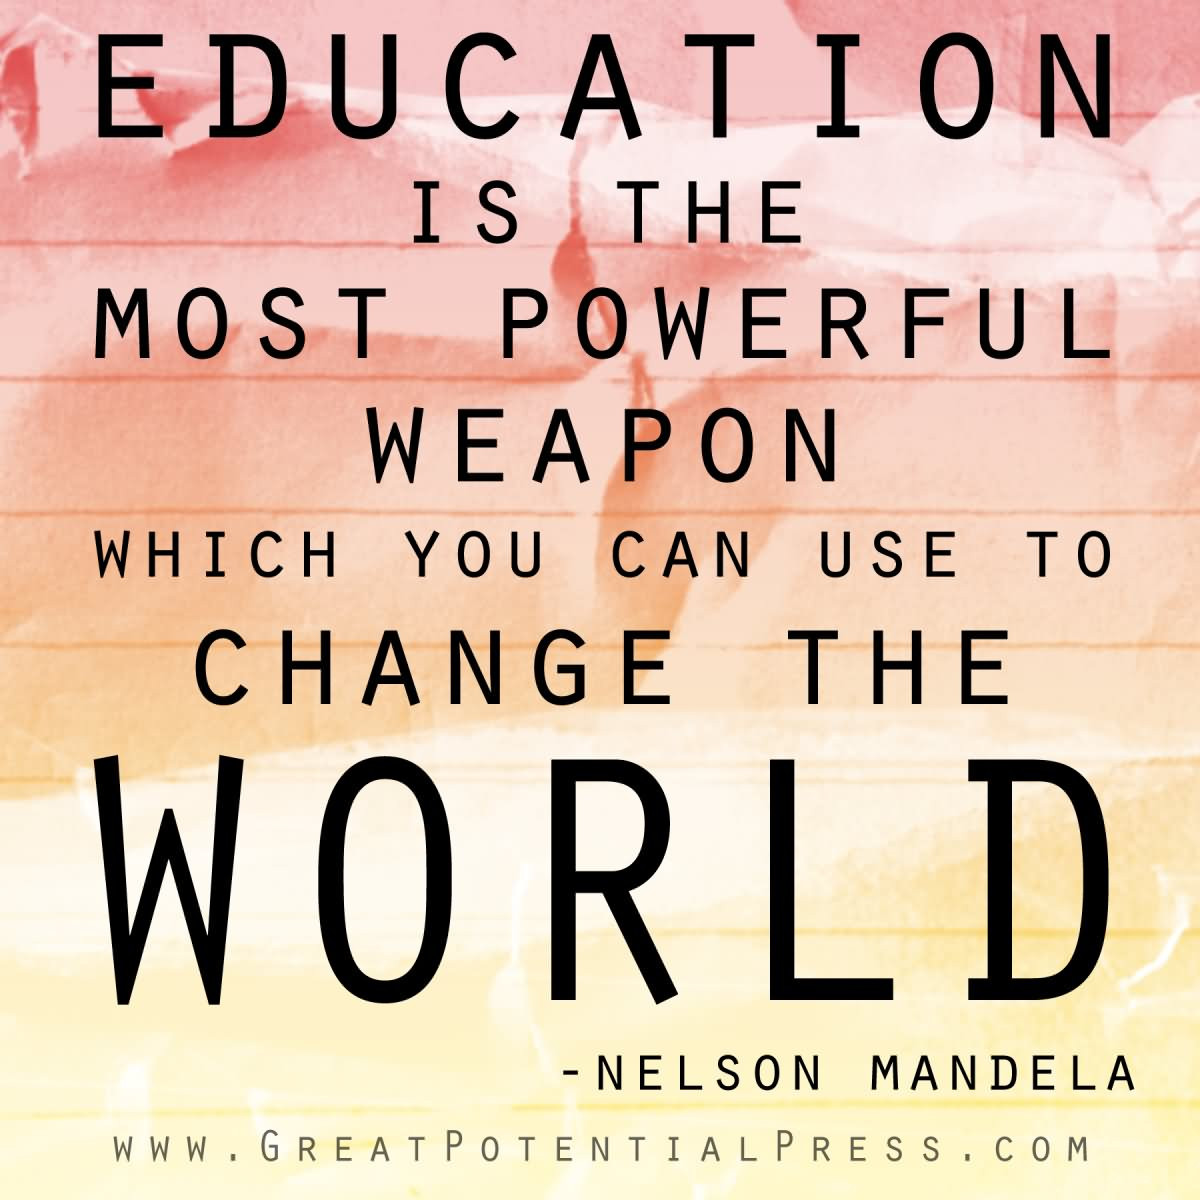 Mandela Education Quote
 Education is the most powerful weapon which you can use to